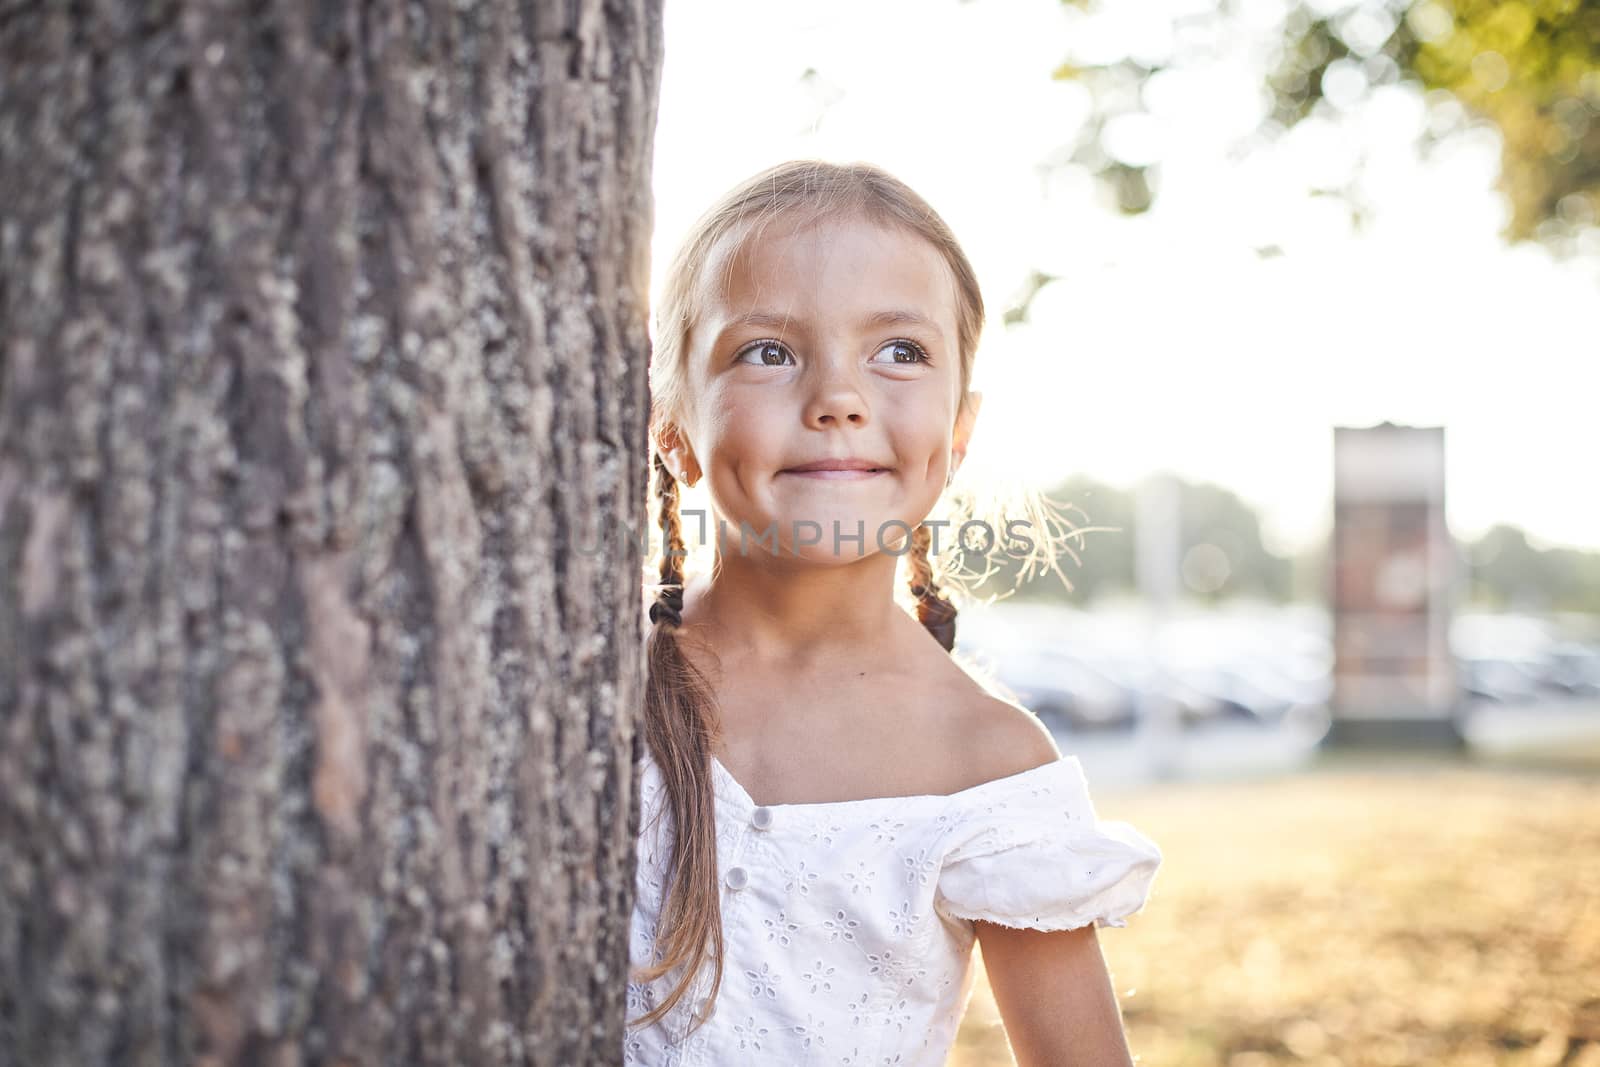 Young girl is hiding behind the tree in a city park